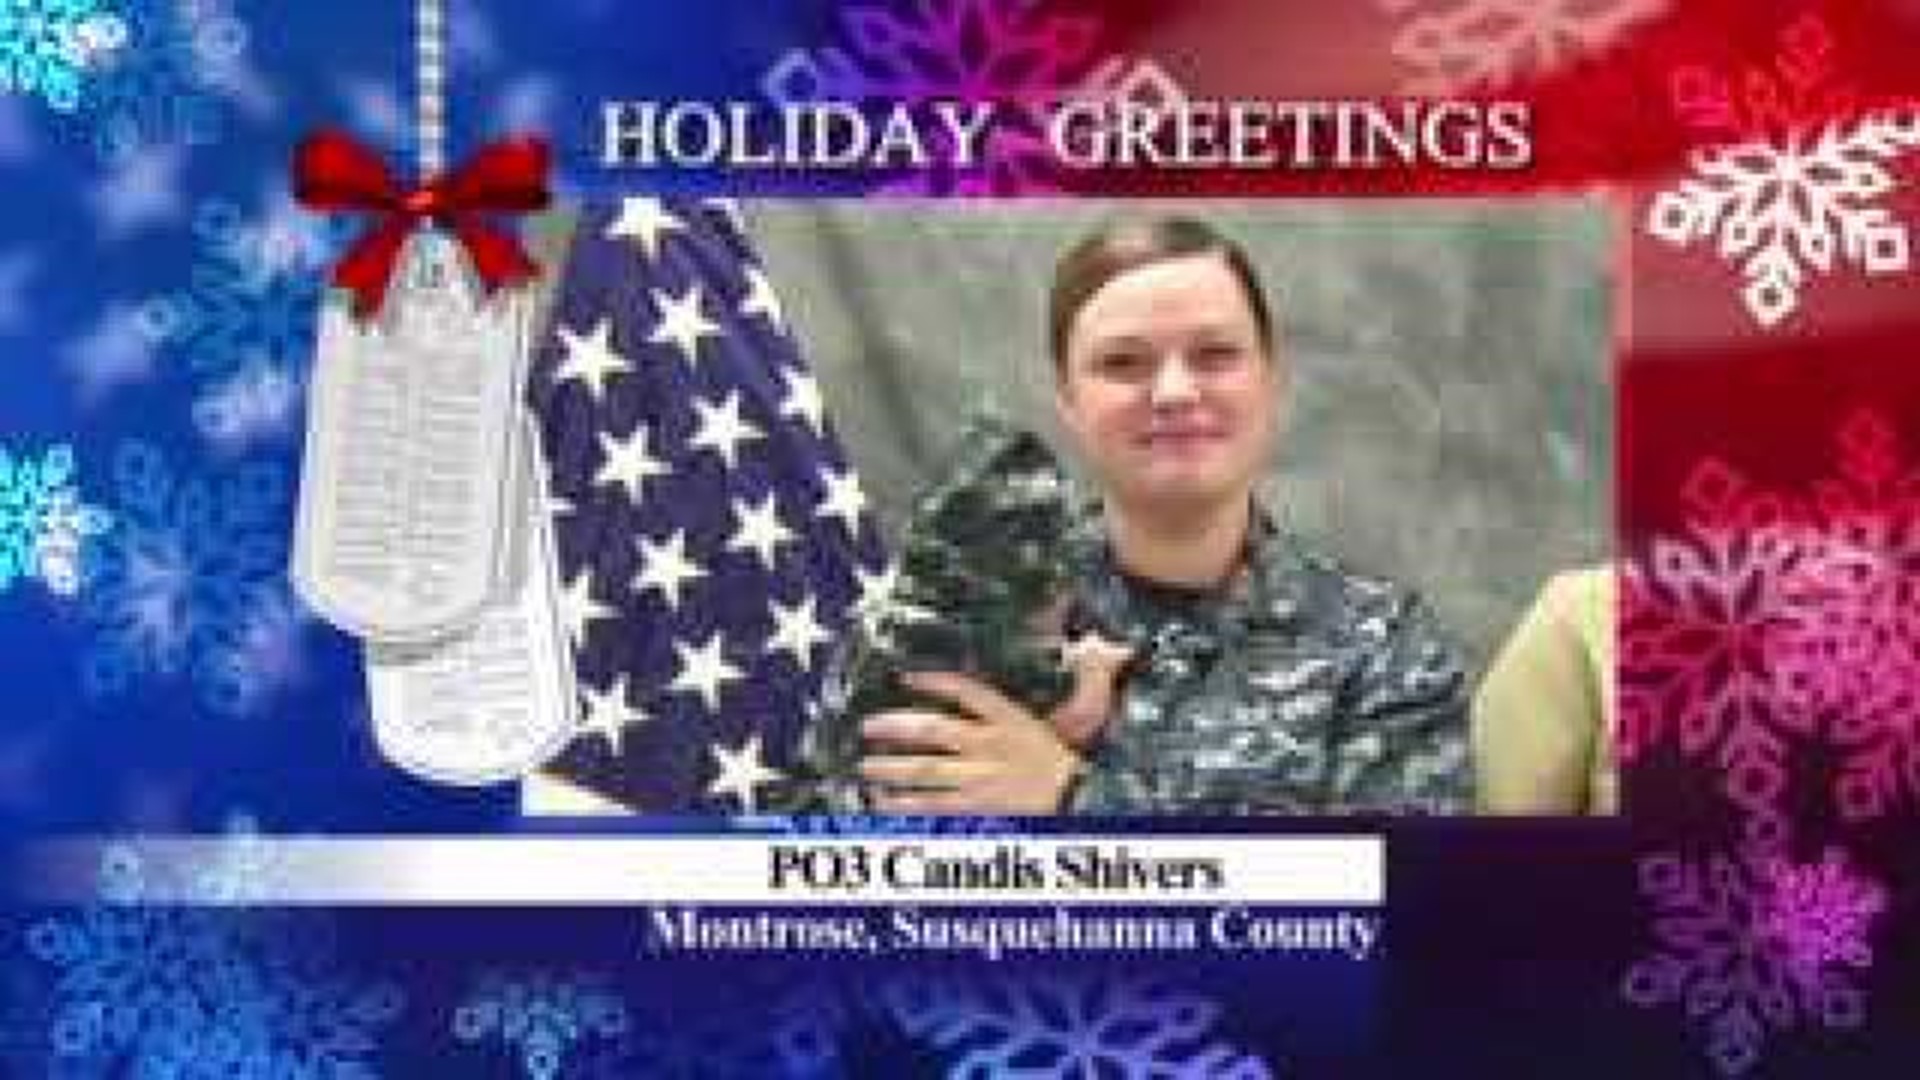 Military Greeting: PO3 Candis Shivers